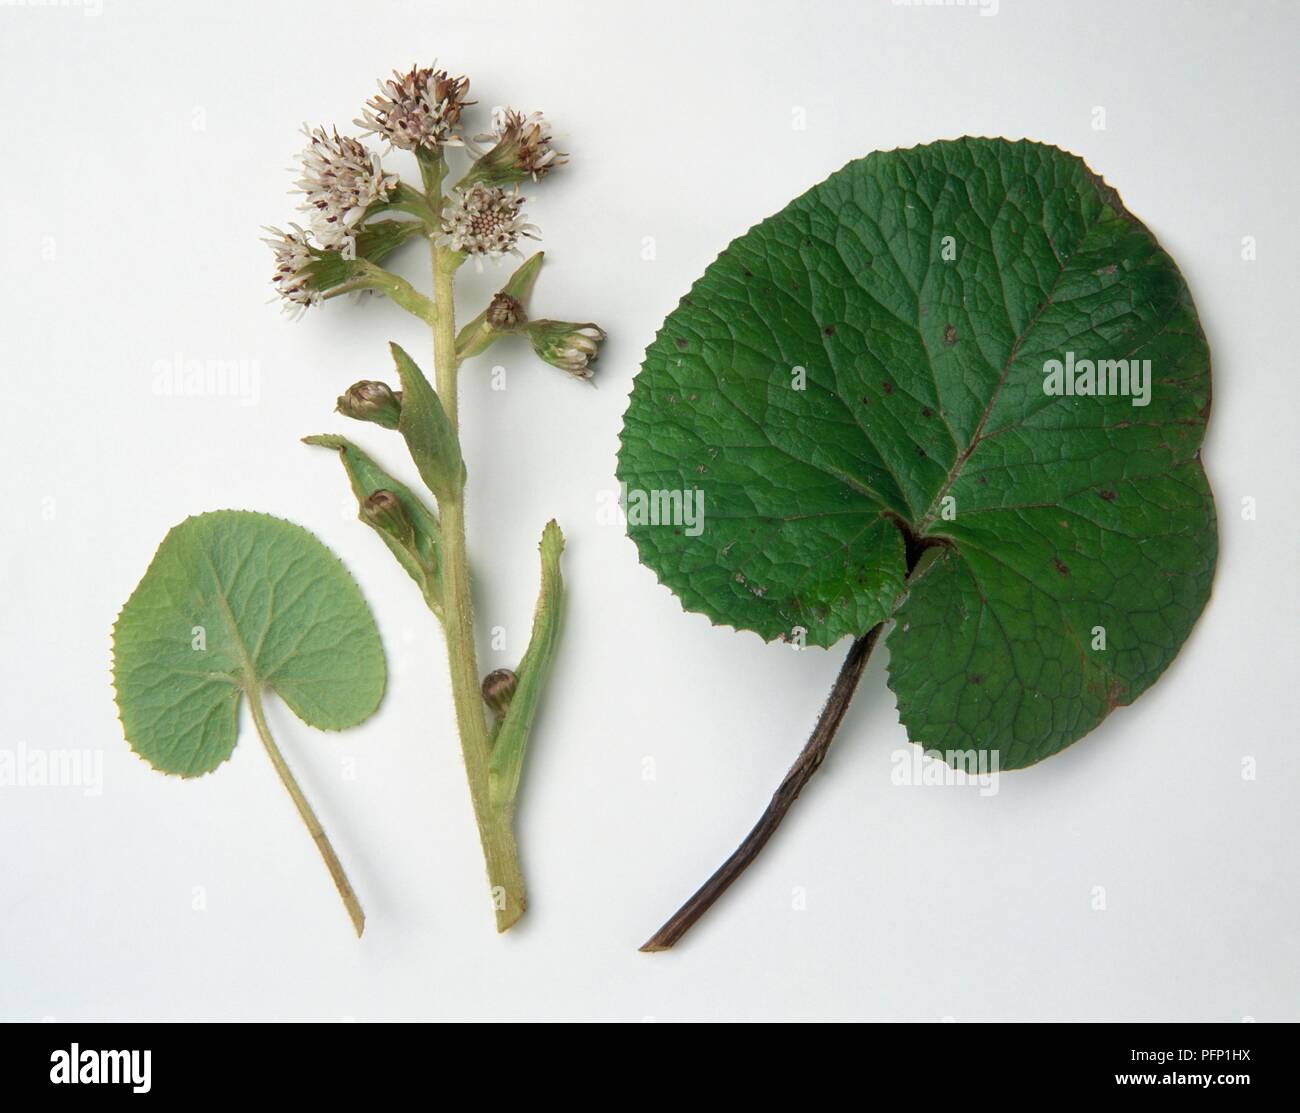 Petasites fragrans (Winter heliotrope), stem with flowers, and leaves Stock Photo